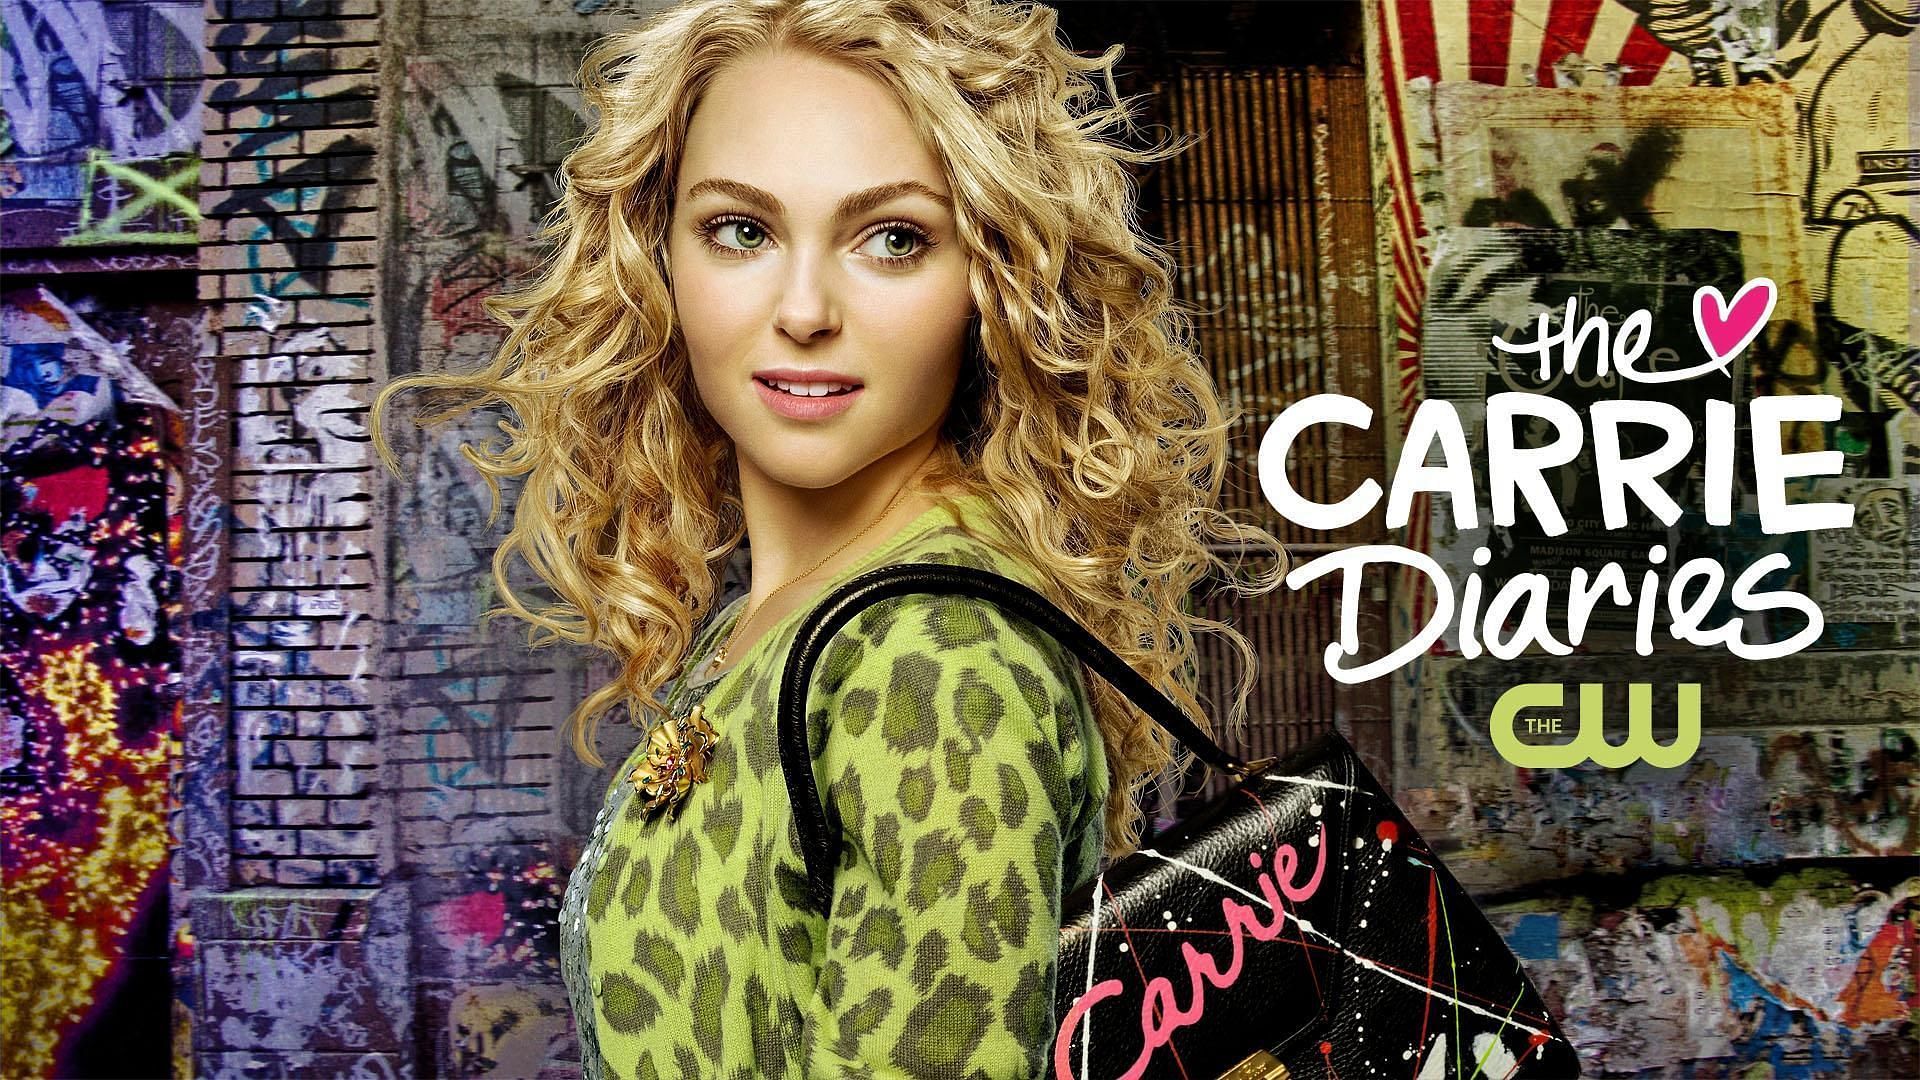 The Carrie Diaries (Image via The CW)